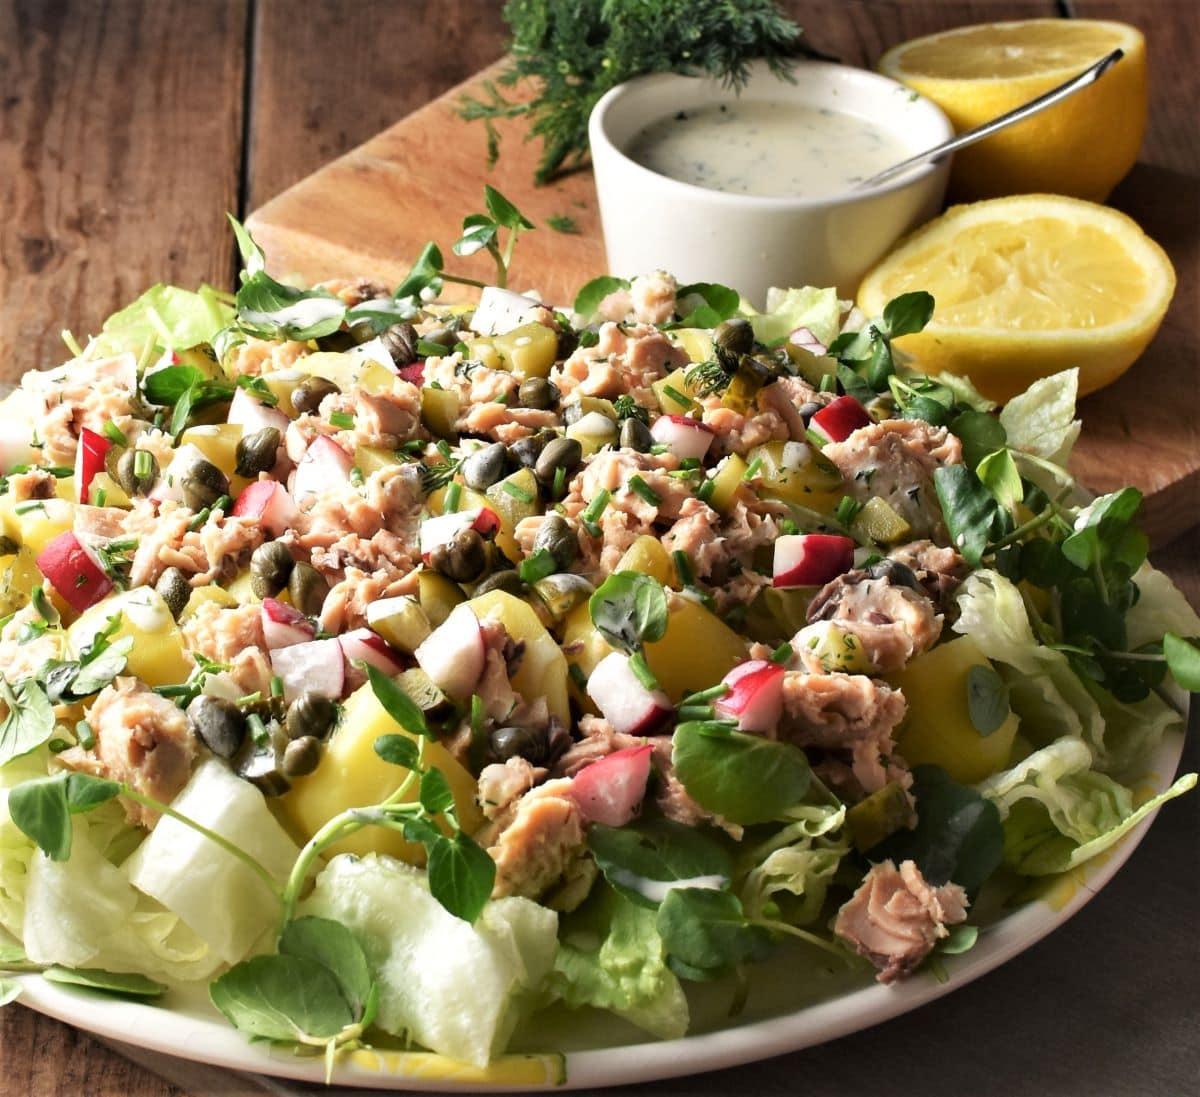 Side view of potato salmon salad with lettuce, lemon and dressing in background.